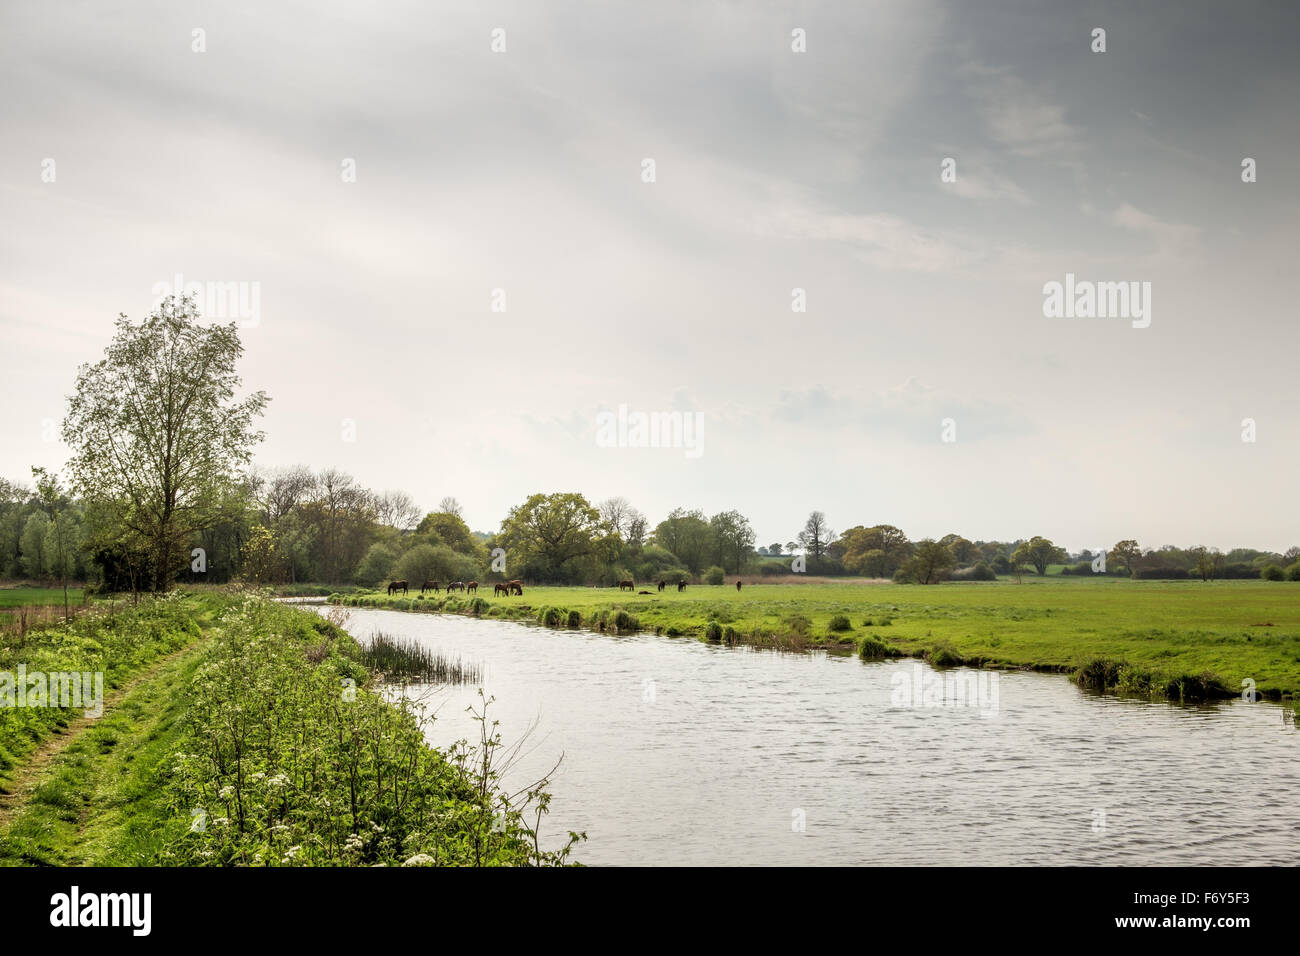 essex countryside  image with a group of horses near water Stock Photo